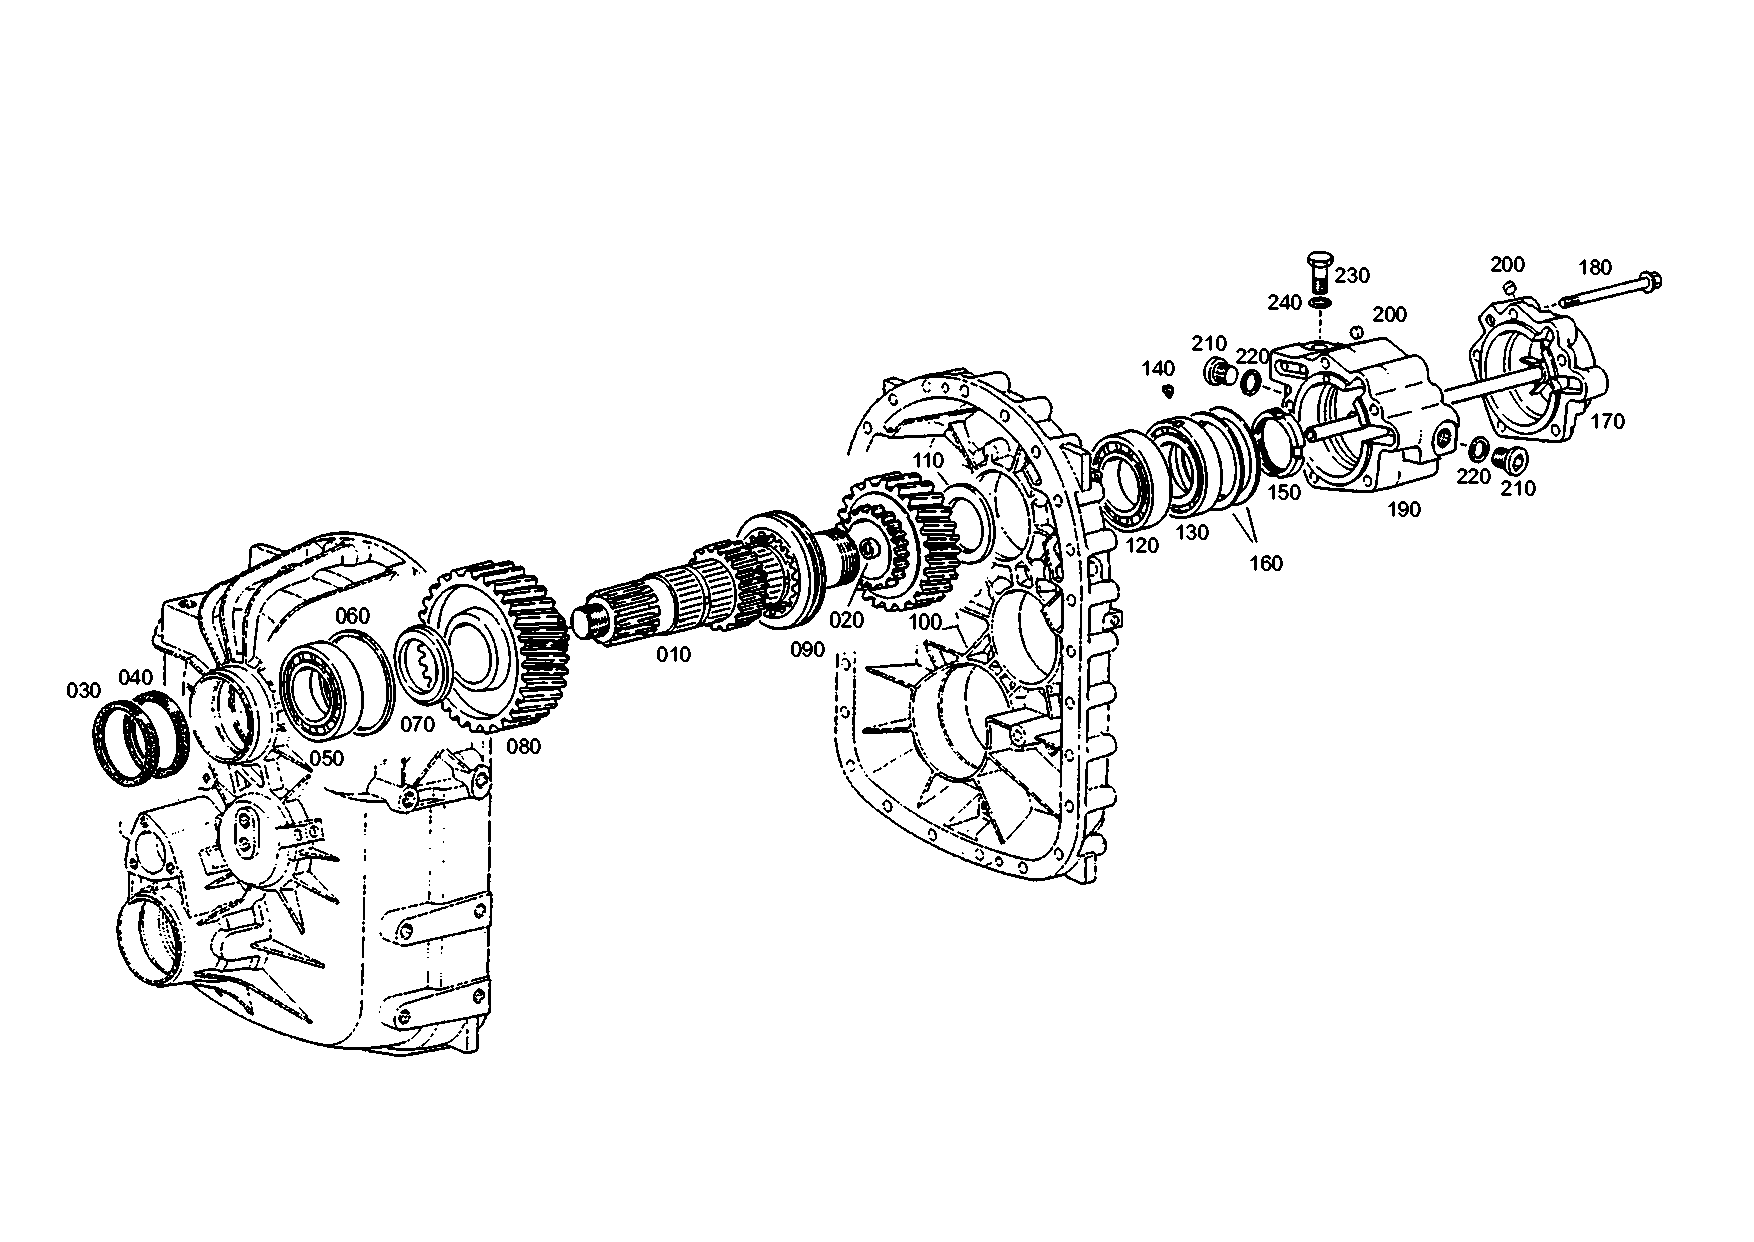 drawing for MARMON Herring MVG751055 - INPUT GEAR (figure 2)